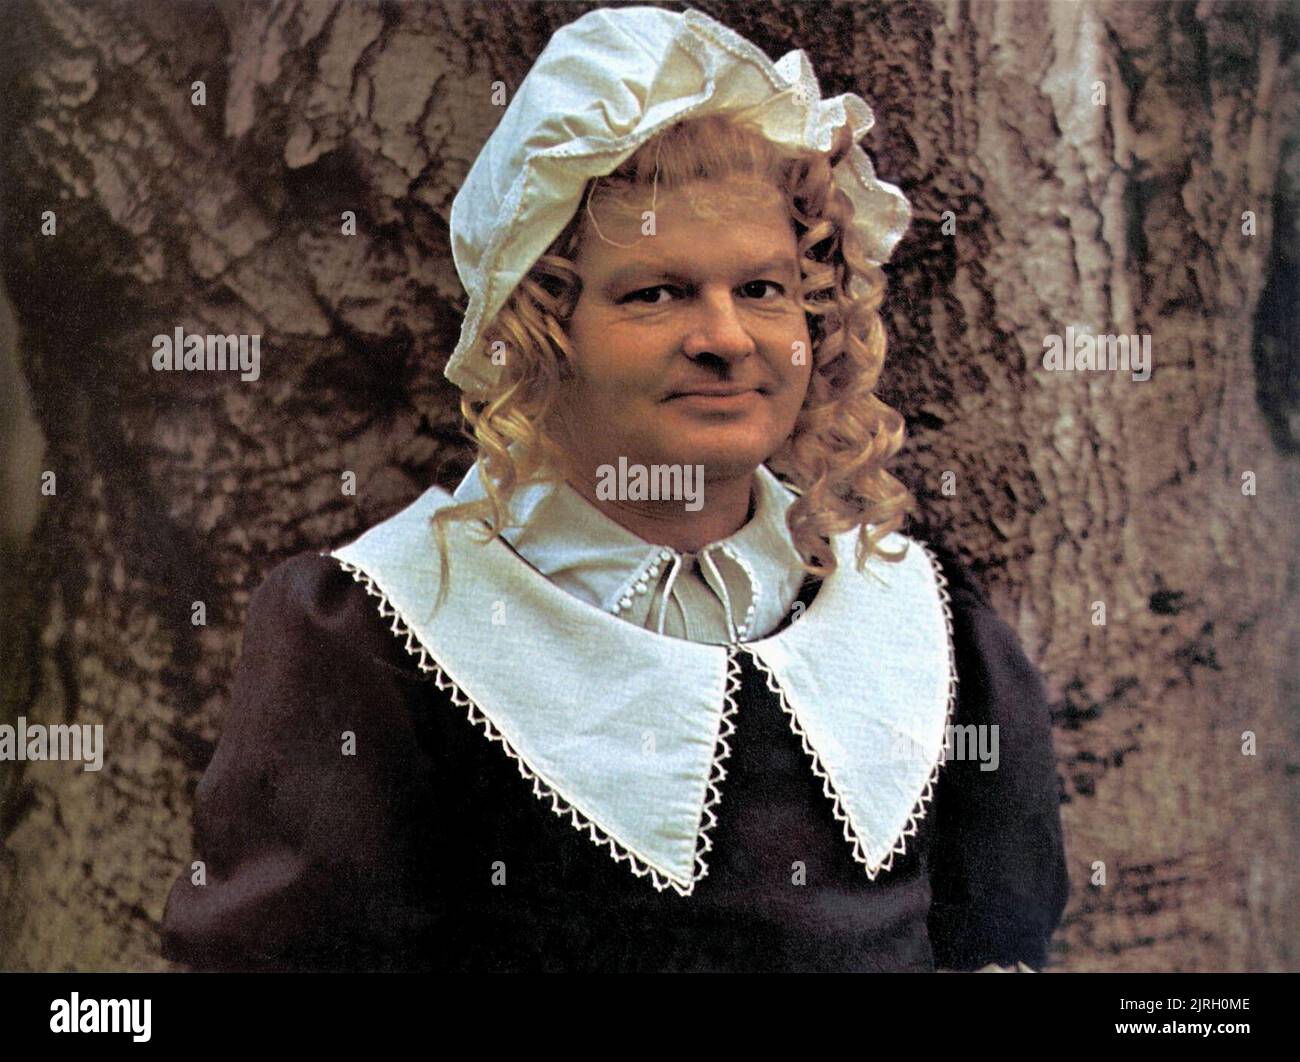 BENNY HILL, THE BENNY HILL SHOW, 1980 Stock Photo